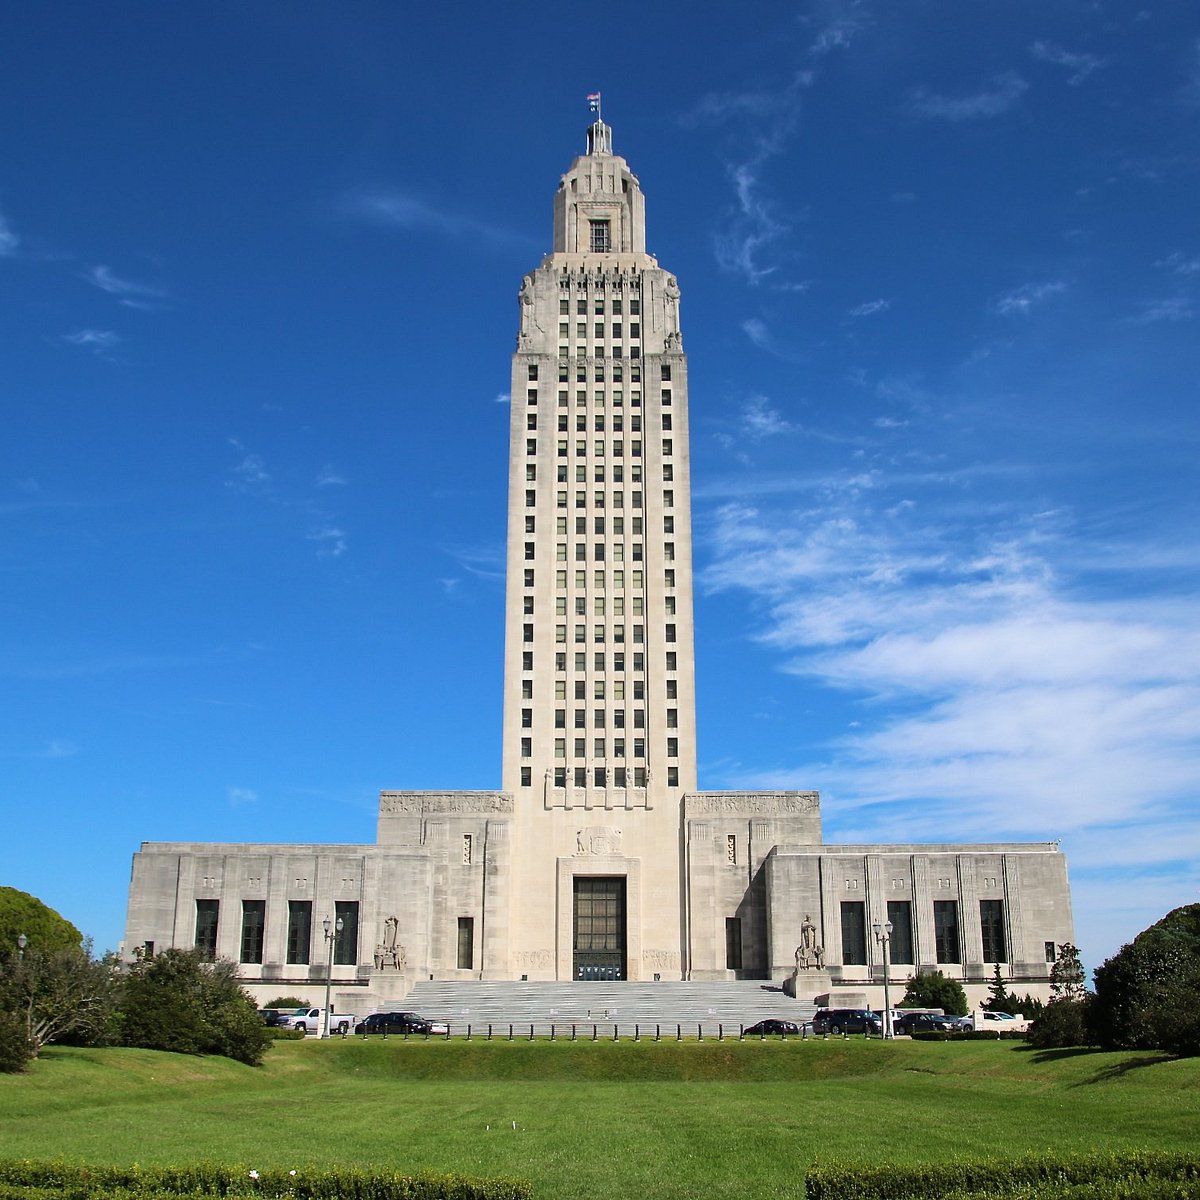 What is Baton Rouge known for?